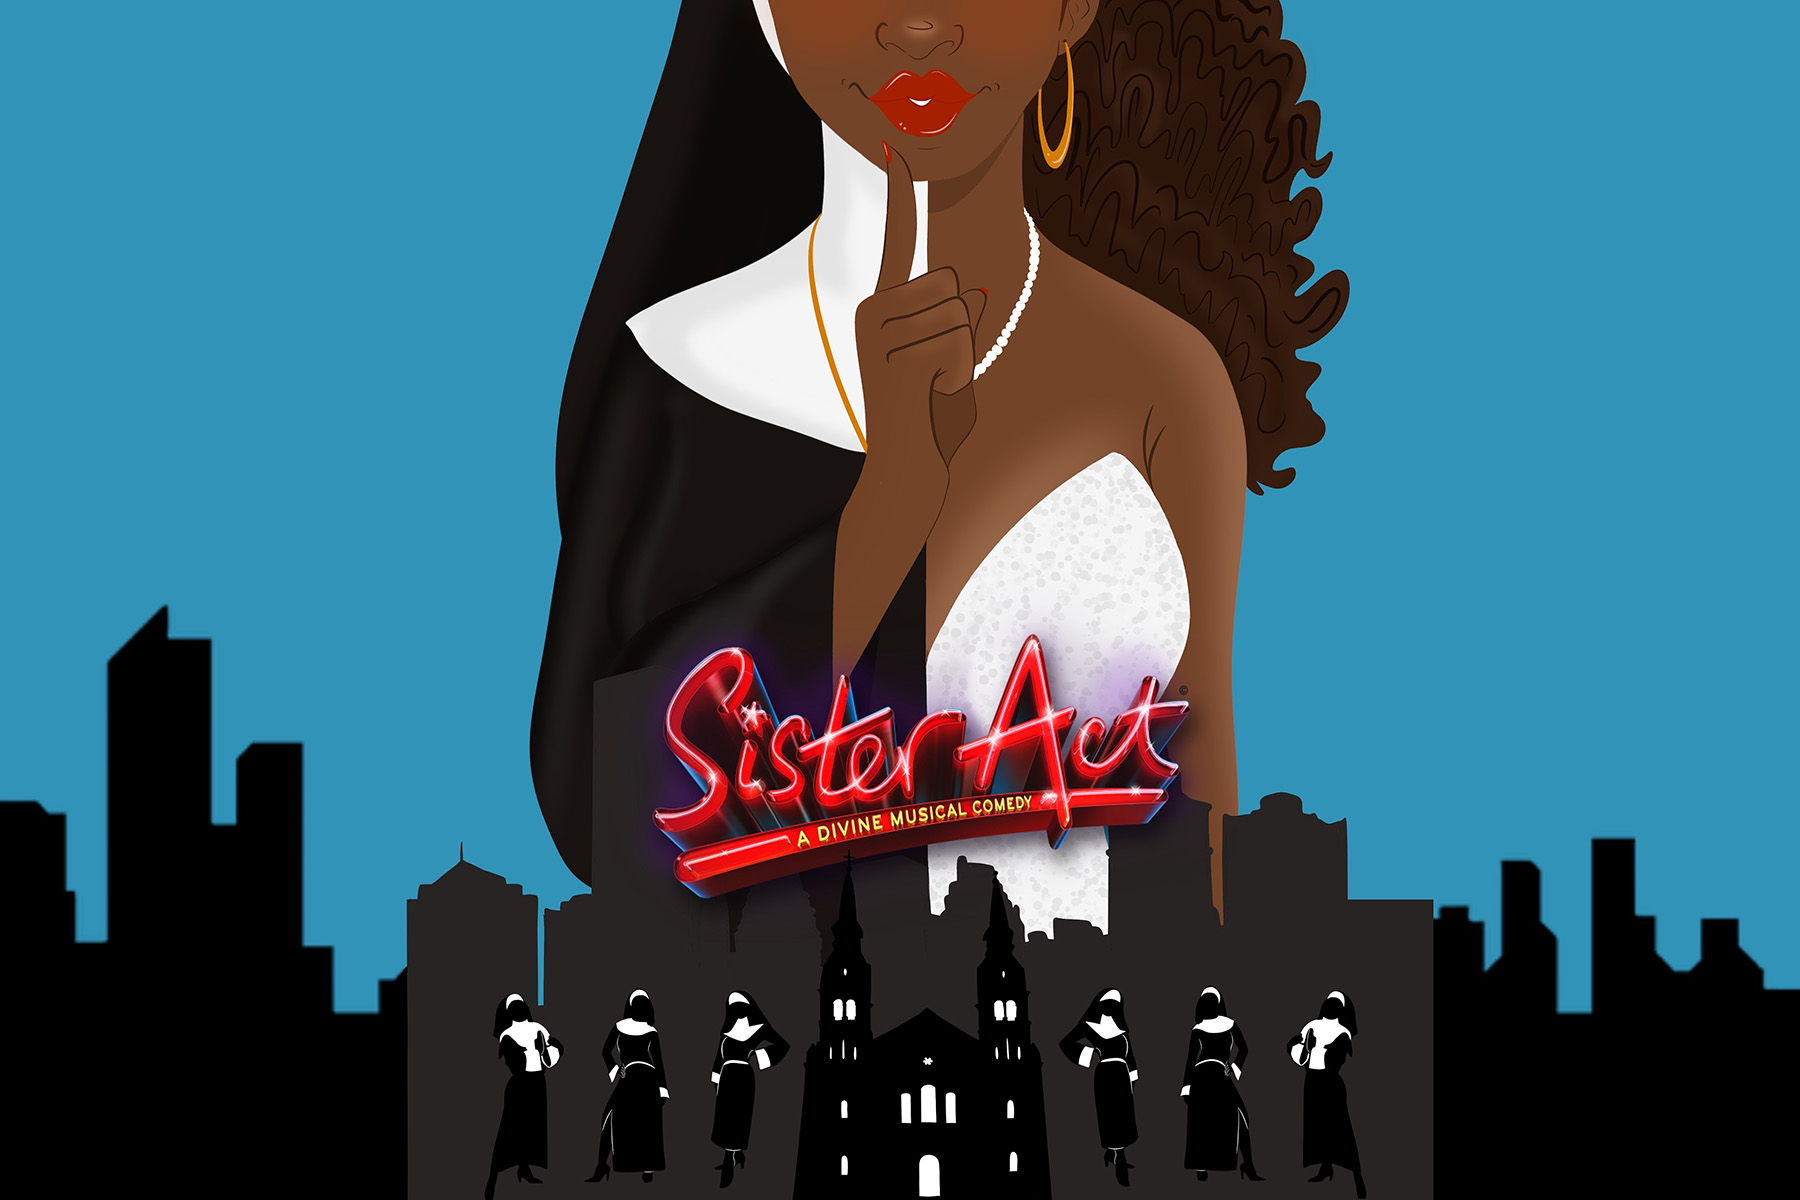 MSJC Presents 'Sister Act!' the Musical